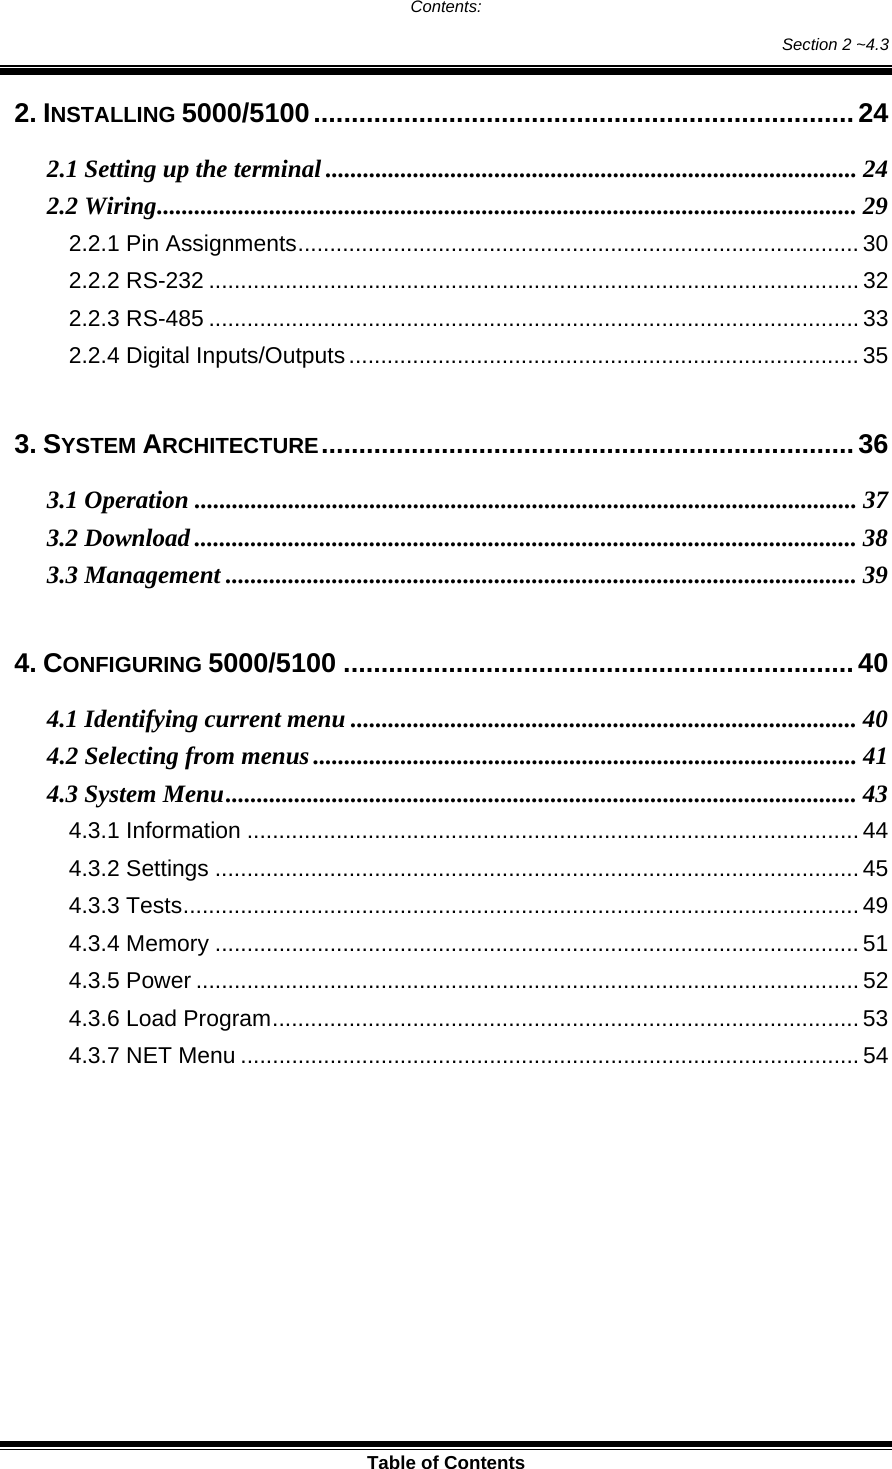  Table of Contents Contents: Section 2 ~4.3 2. INSTALLING 5000/5100........................................................................24 2.1 Setting up the terminal ..................................................................................... 24 2.2 Wiring................................................................................................................ 29 2.2.1 Pin Assignments........................................................................................ 30 2.2.2 RS-232 ...................................................................................................... 32 2.2.3 RS-485 ...................................................................................................... 33 2.2.4 Digital Inputs/Outputs................................................................................ 35  3. SYSTEM ARCHITECTURE....................................................................... 36 3.1 Operation .......................................................................................................... 37 3.2 Download .......................................................................................................... 38 3.3 Management ..................................................................................................... 39  4. CONFIGURING 5000/5100 ....................................................................40 4.1 Identifying current menu ................................................................................. 40 4.2 Selecting from menus....................................................................................... 41 4.3 System Menu..................................................................................................... 43 4.3.1 Information ................................................................................................44 4.3.2 Settings ..................................................................................................... 45 4.3.3 Tests.......................................................................................................... 49 4.3.4 Memory .....................................................................................................51 4.3.5 Power ........................................................................................................ 52 4.3.6 Load Program............................................................................................ 53 4.3.7 NET Menu ................................................................................................. 54 